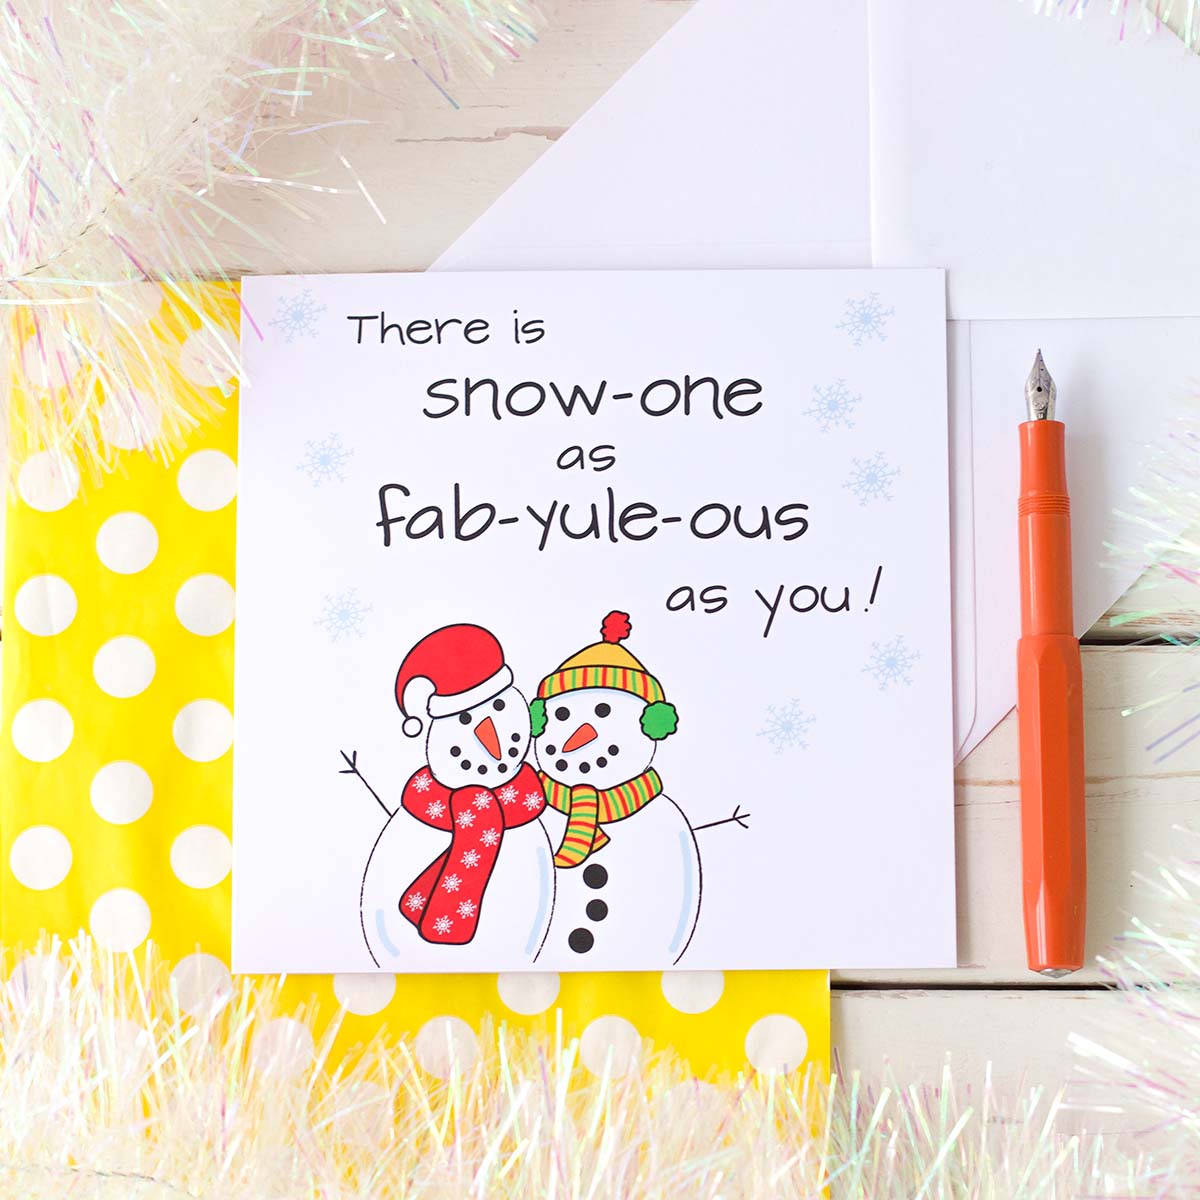 Illustrated Christmas Card by fizzi~jayne. Two snowmen hugging, one wearing a santa hat and red scarf th other with a bobble hat, ear muffs and scarf. The handkettering reads There is Snow-one as fab-yule-ous as you!